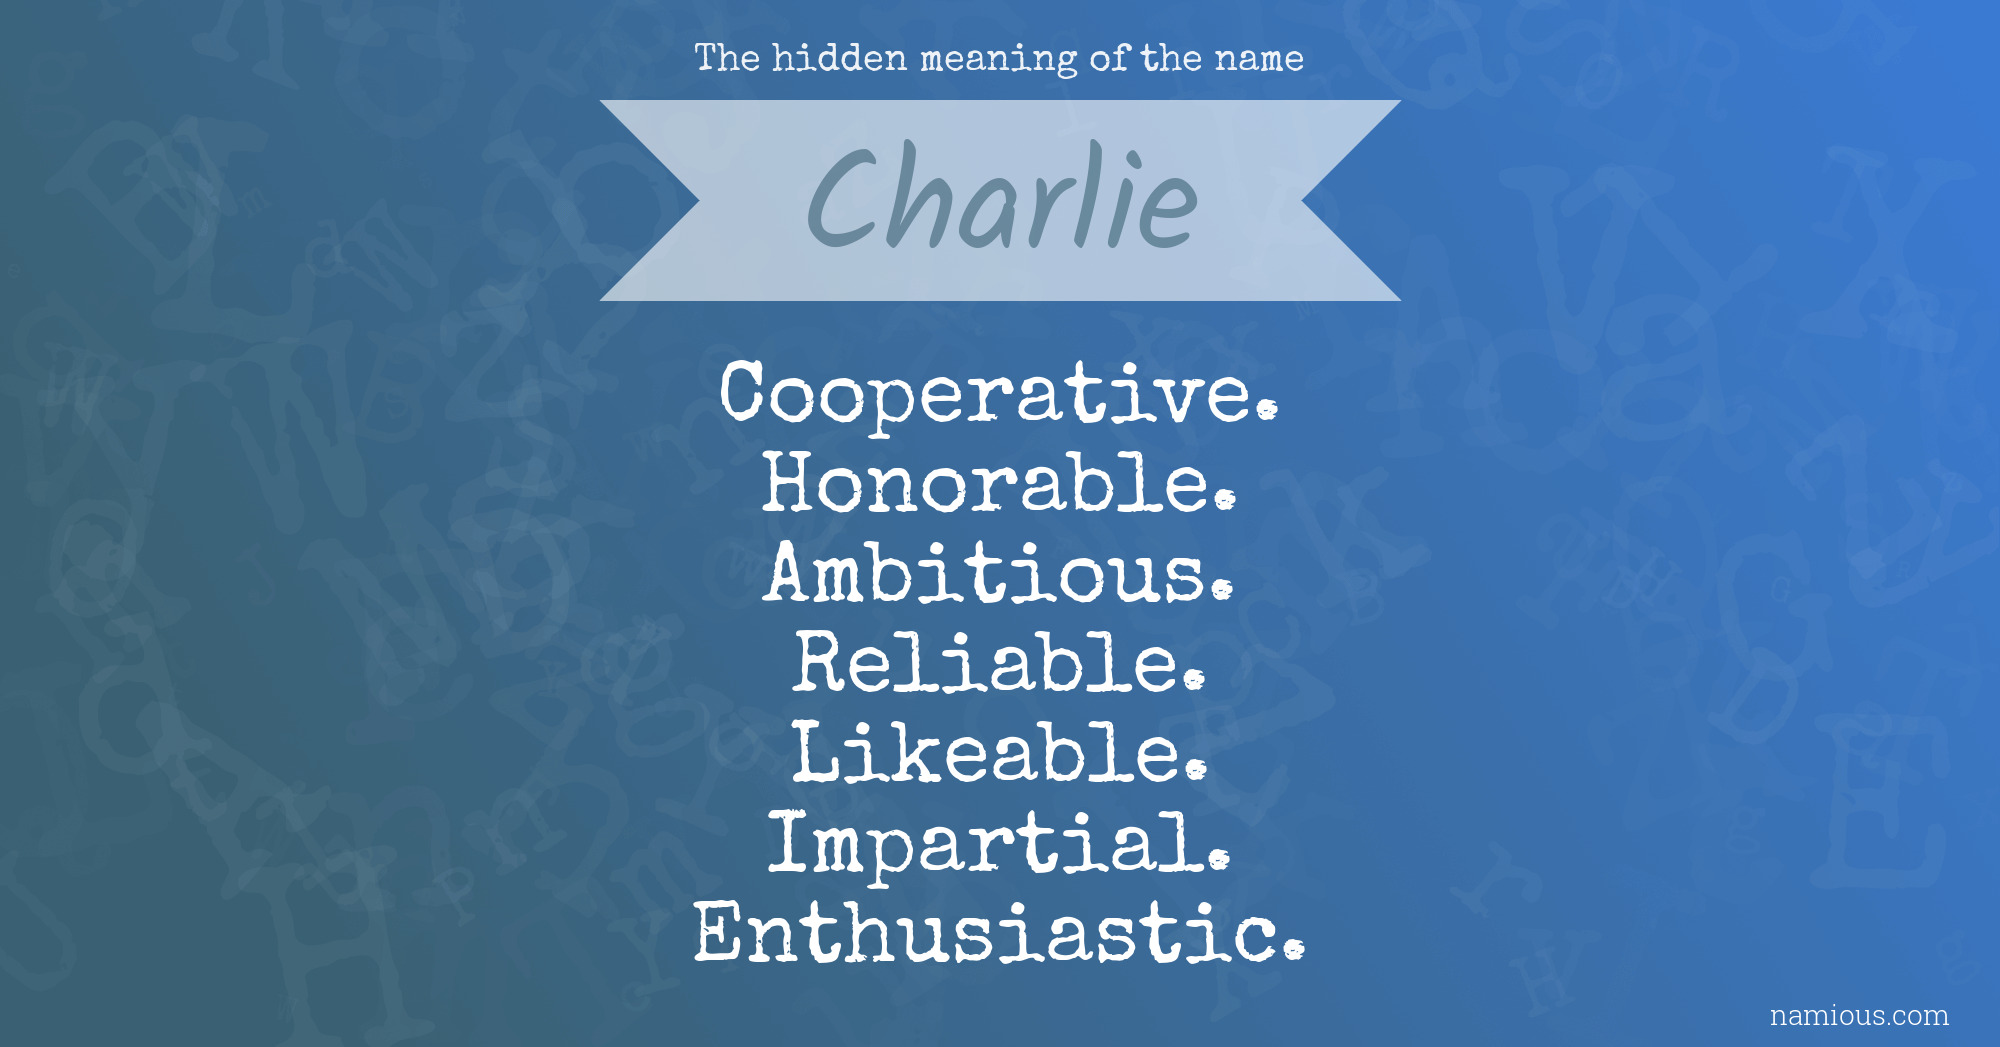 The hidden meaning of the name Charlie